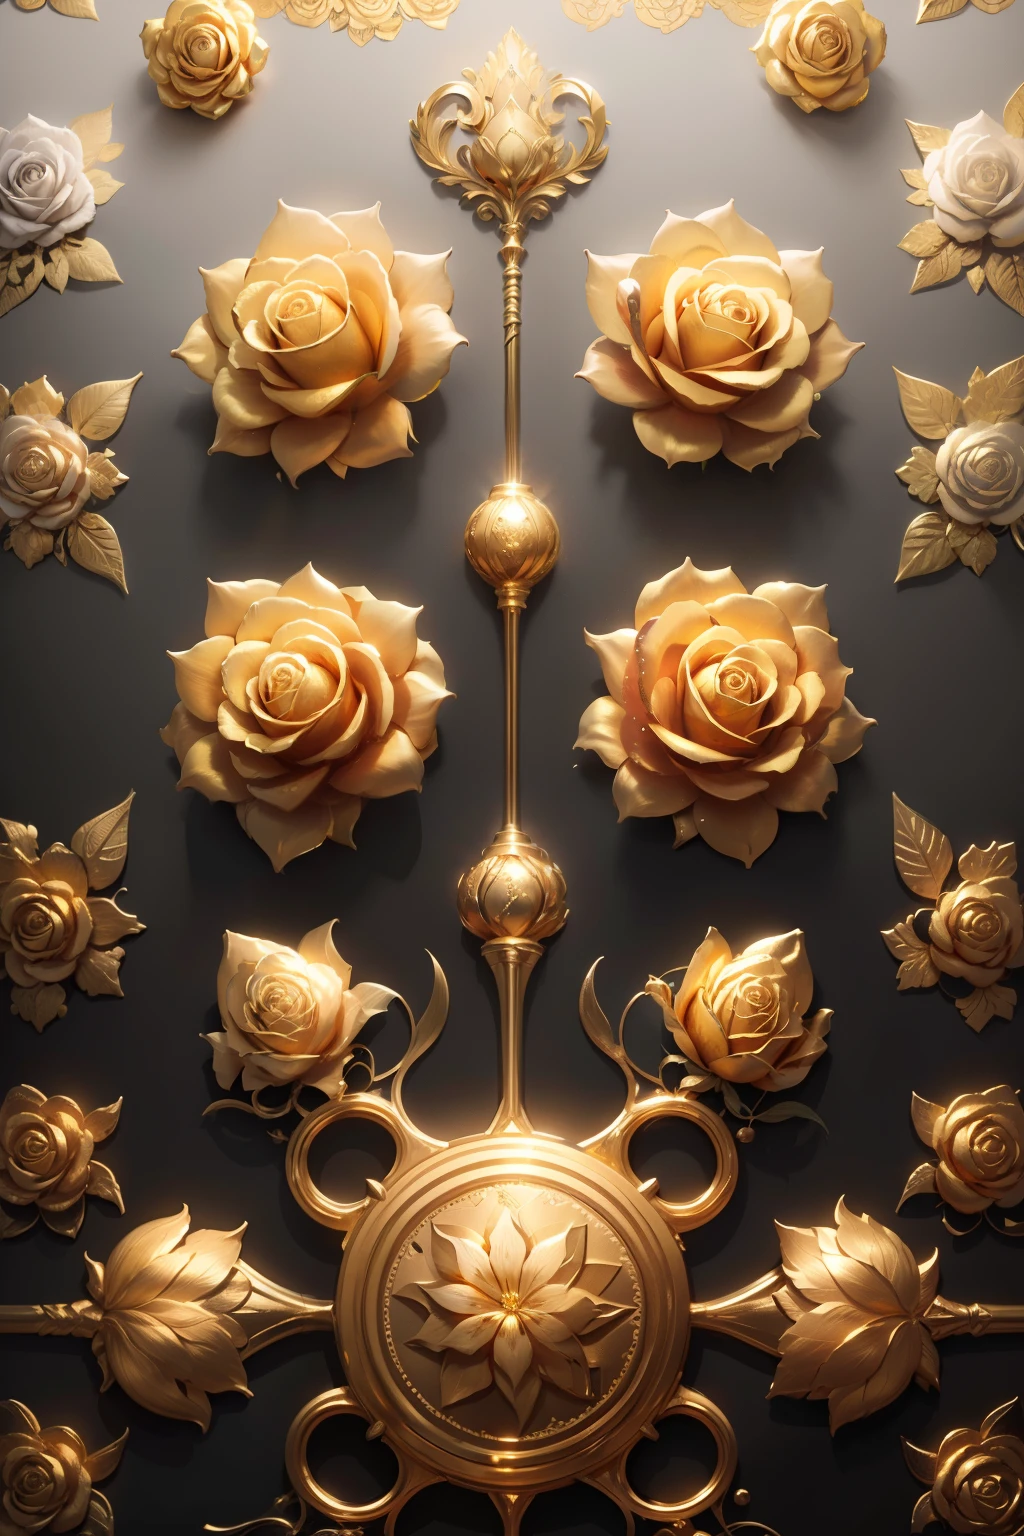 1 full golden all-metal rose，metalictexture，All metals，gold parts，Reflectoraterial of metal，golden flowers，super detailing，Ultra-clear image quality，solid color backdrop，